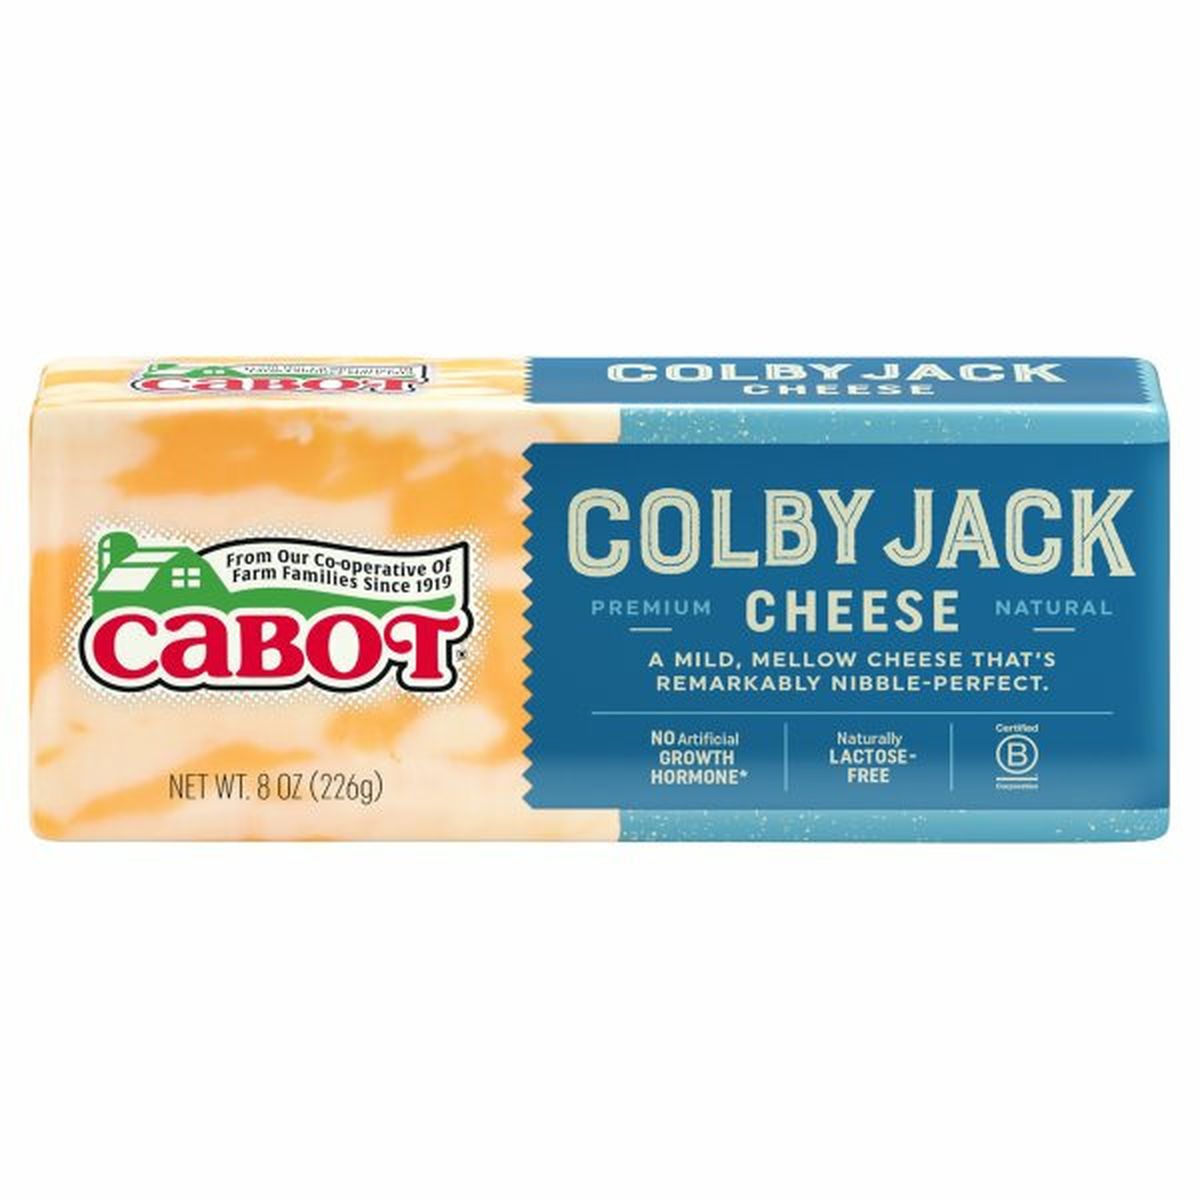 Calories in Cabot Cheese, Colby Jack